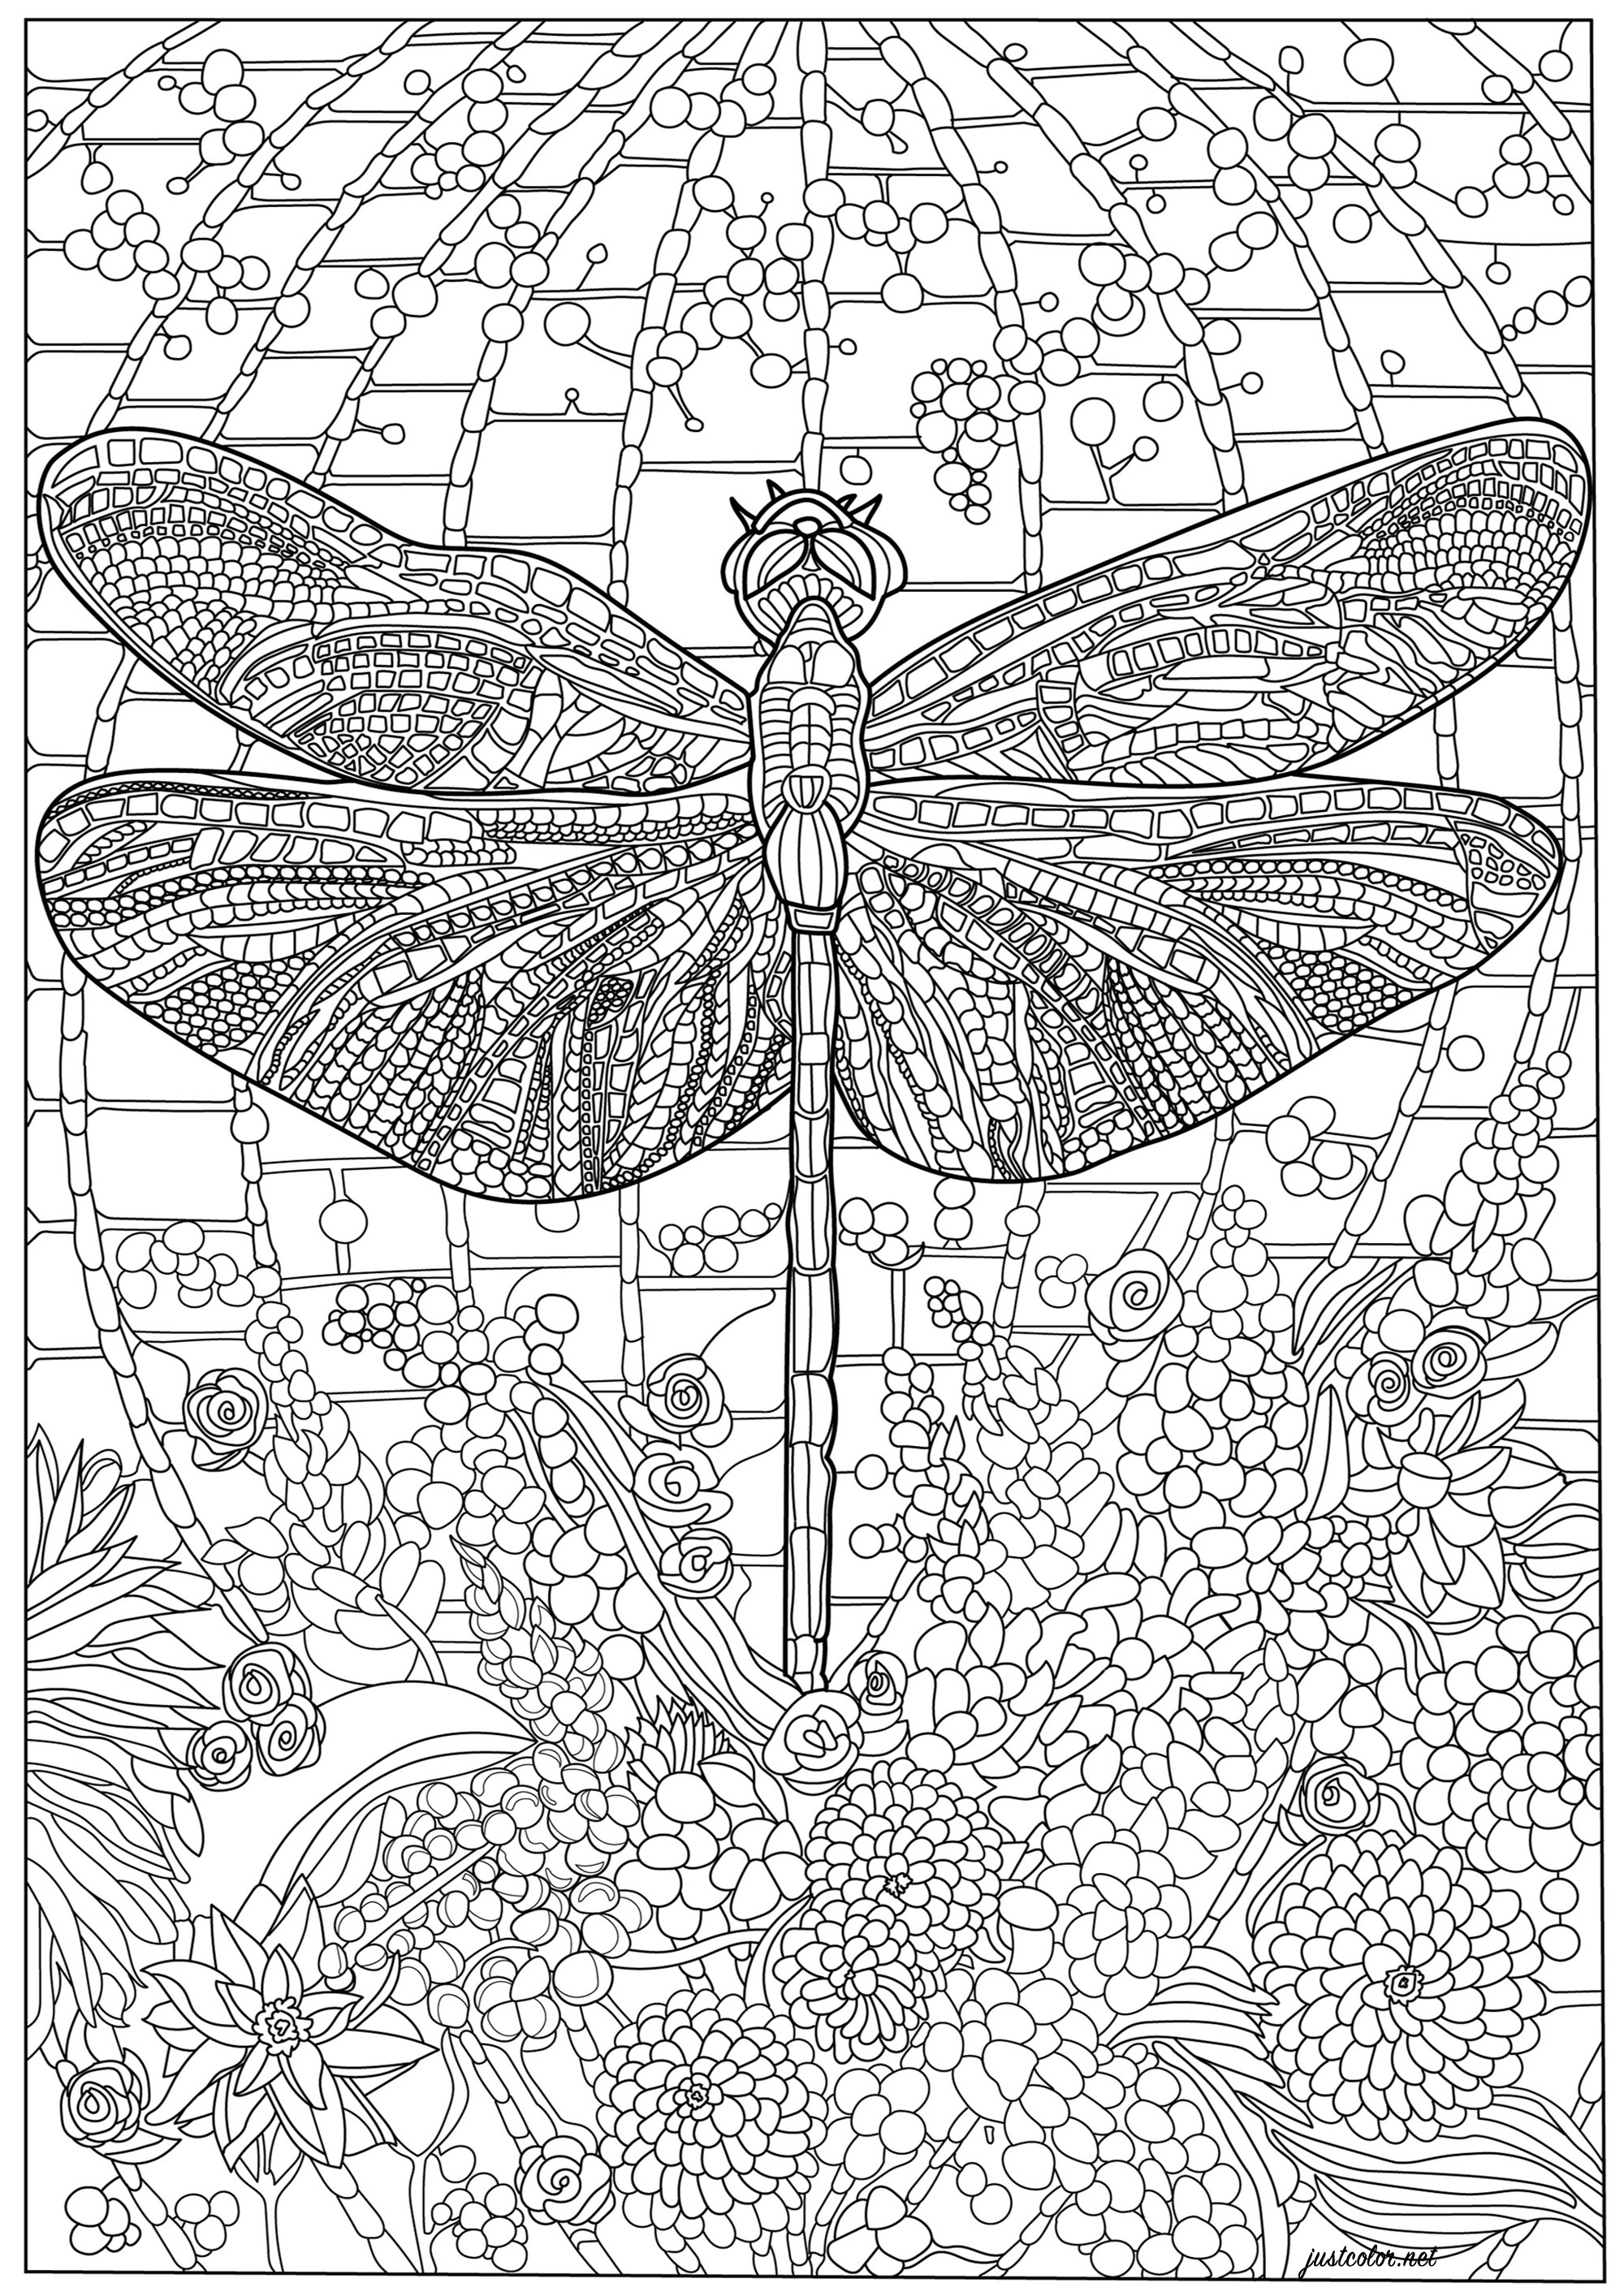 Dragonfly and many intricate details. A coloring scheme teeming with details, both in the dragonfly's body and in the background, Artist : Morgan